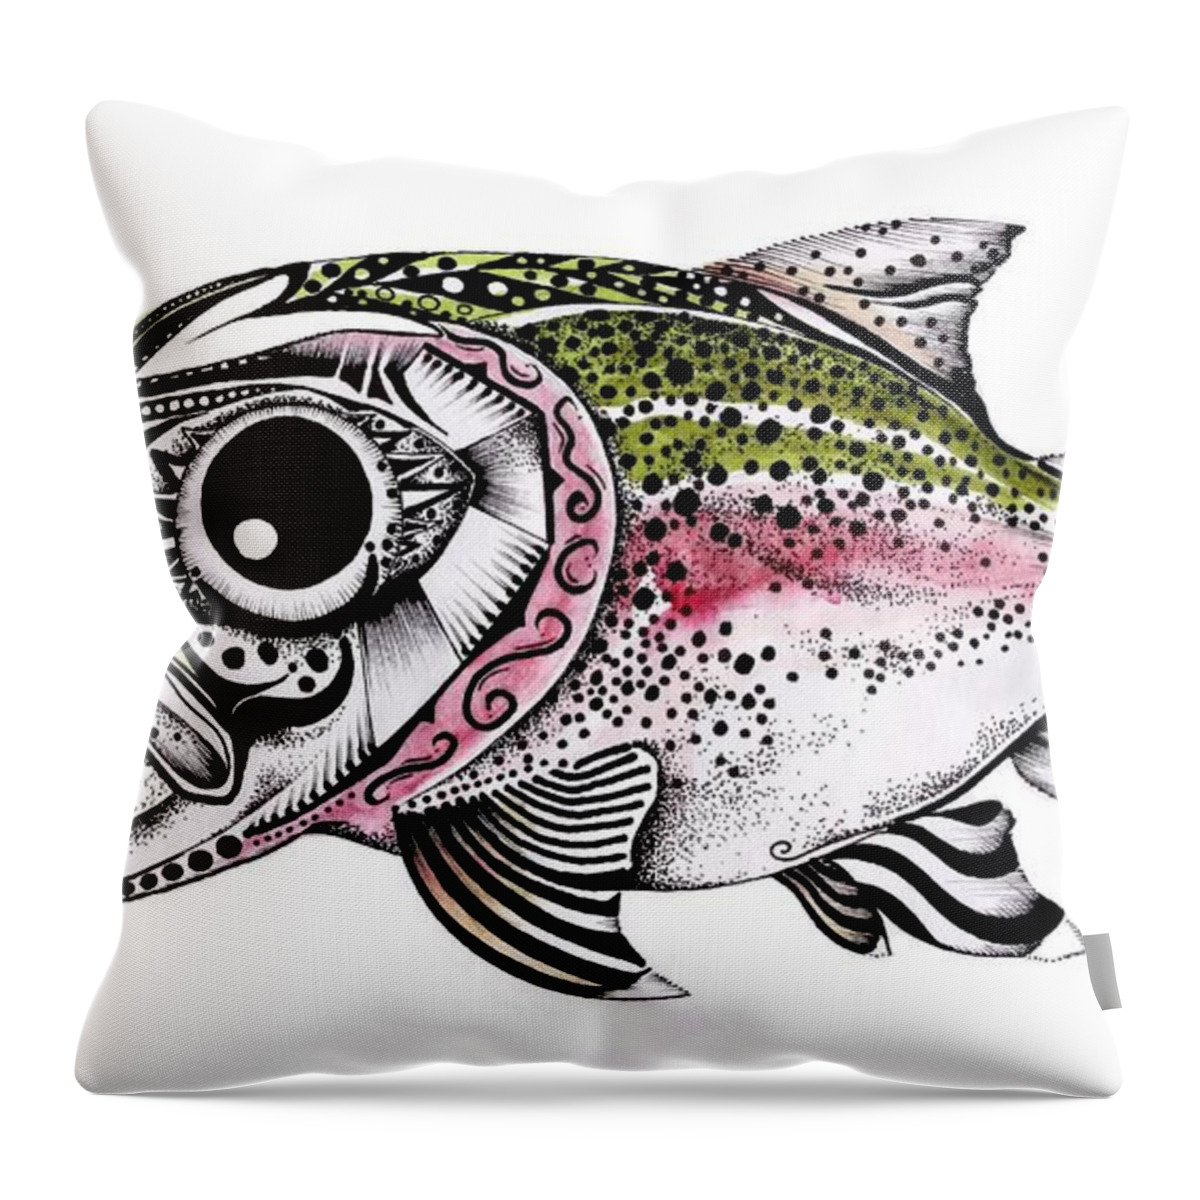 Rainbow Trout Throw Pillow featuring the painting Abstract Alaskan Rainbow Trout by J Vincent Scarpace